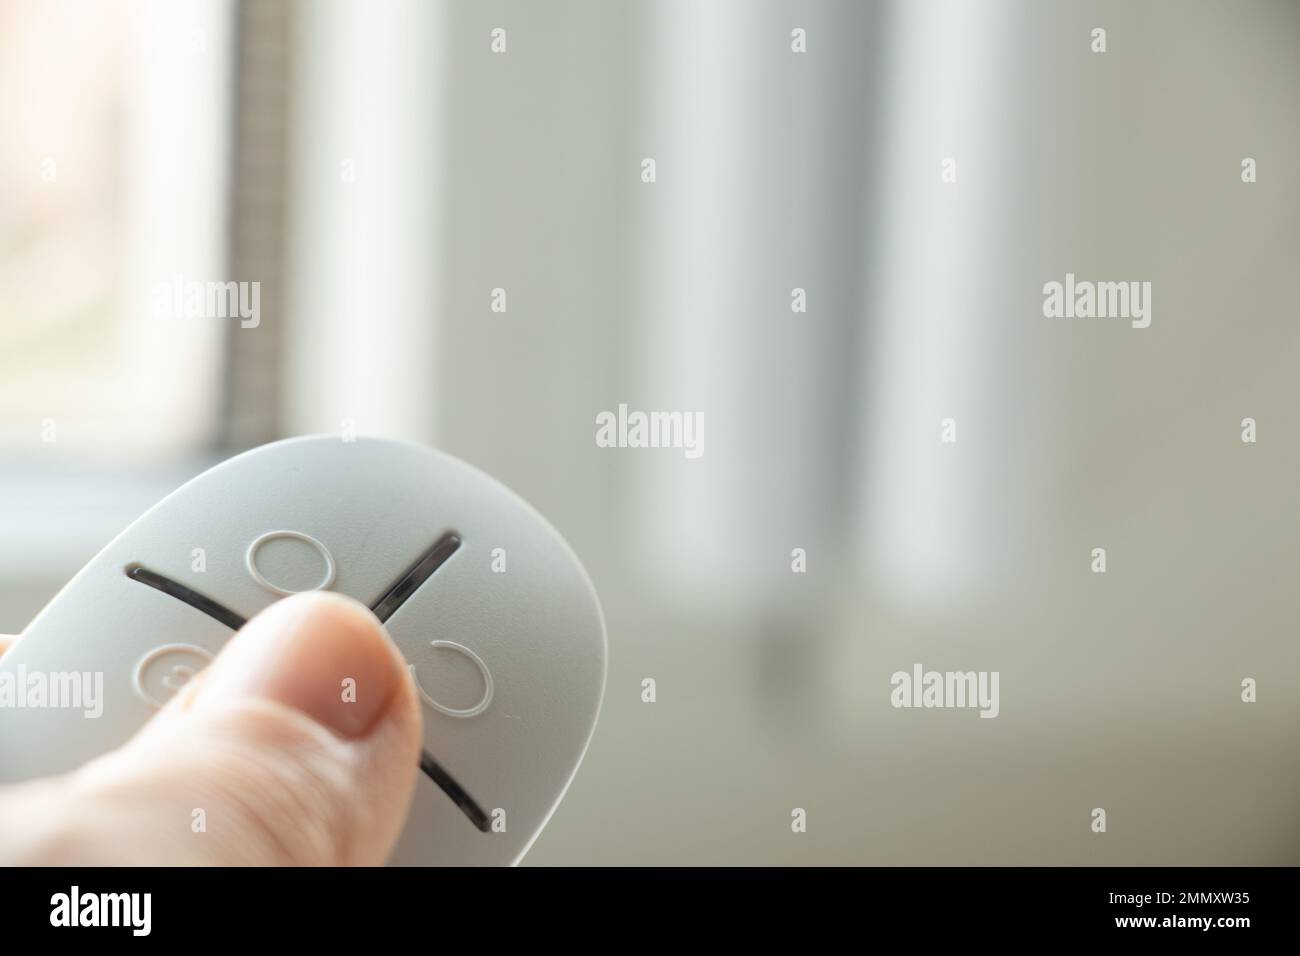 home security system on the windows, an opening sensor and a remote control in the hands of opening and closing, an alarm remote control Stock Photo